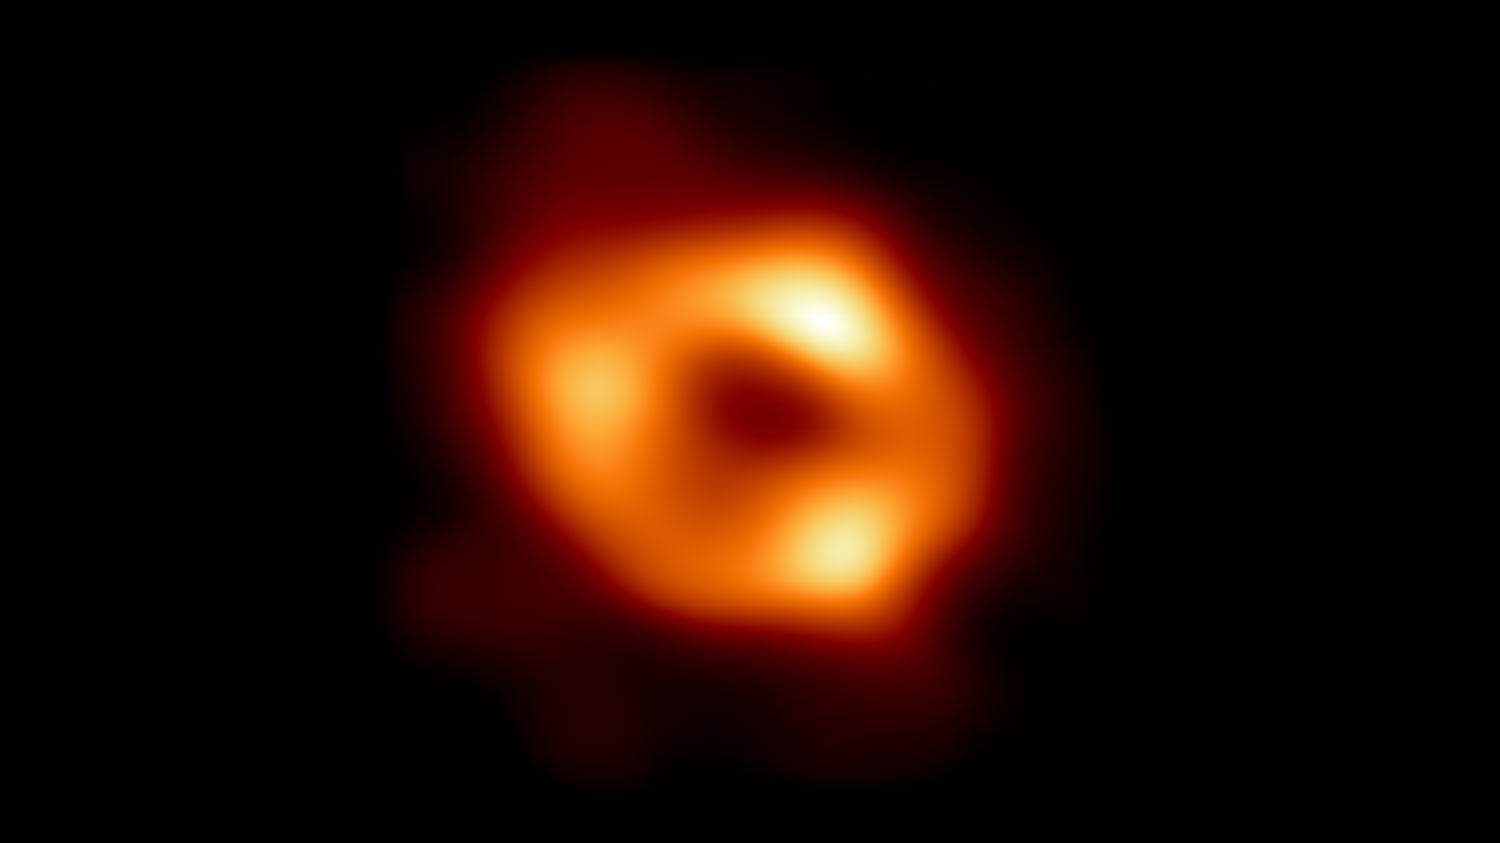 Orange glowing ring shows the event horizon of the Milky Way's giant black hole, Sagittarius A*.  It's one of our top space images.